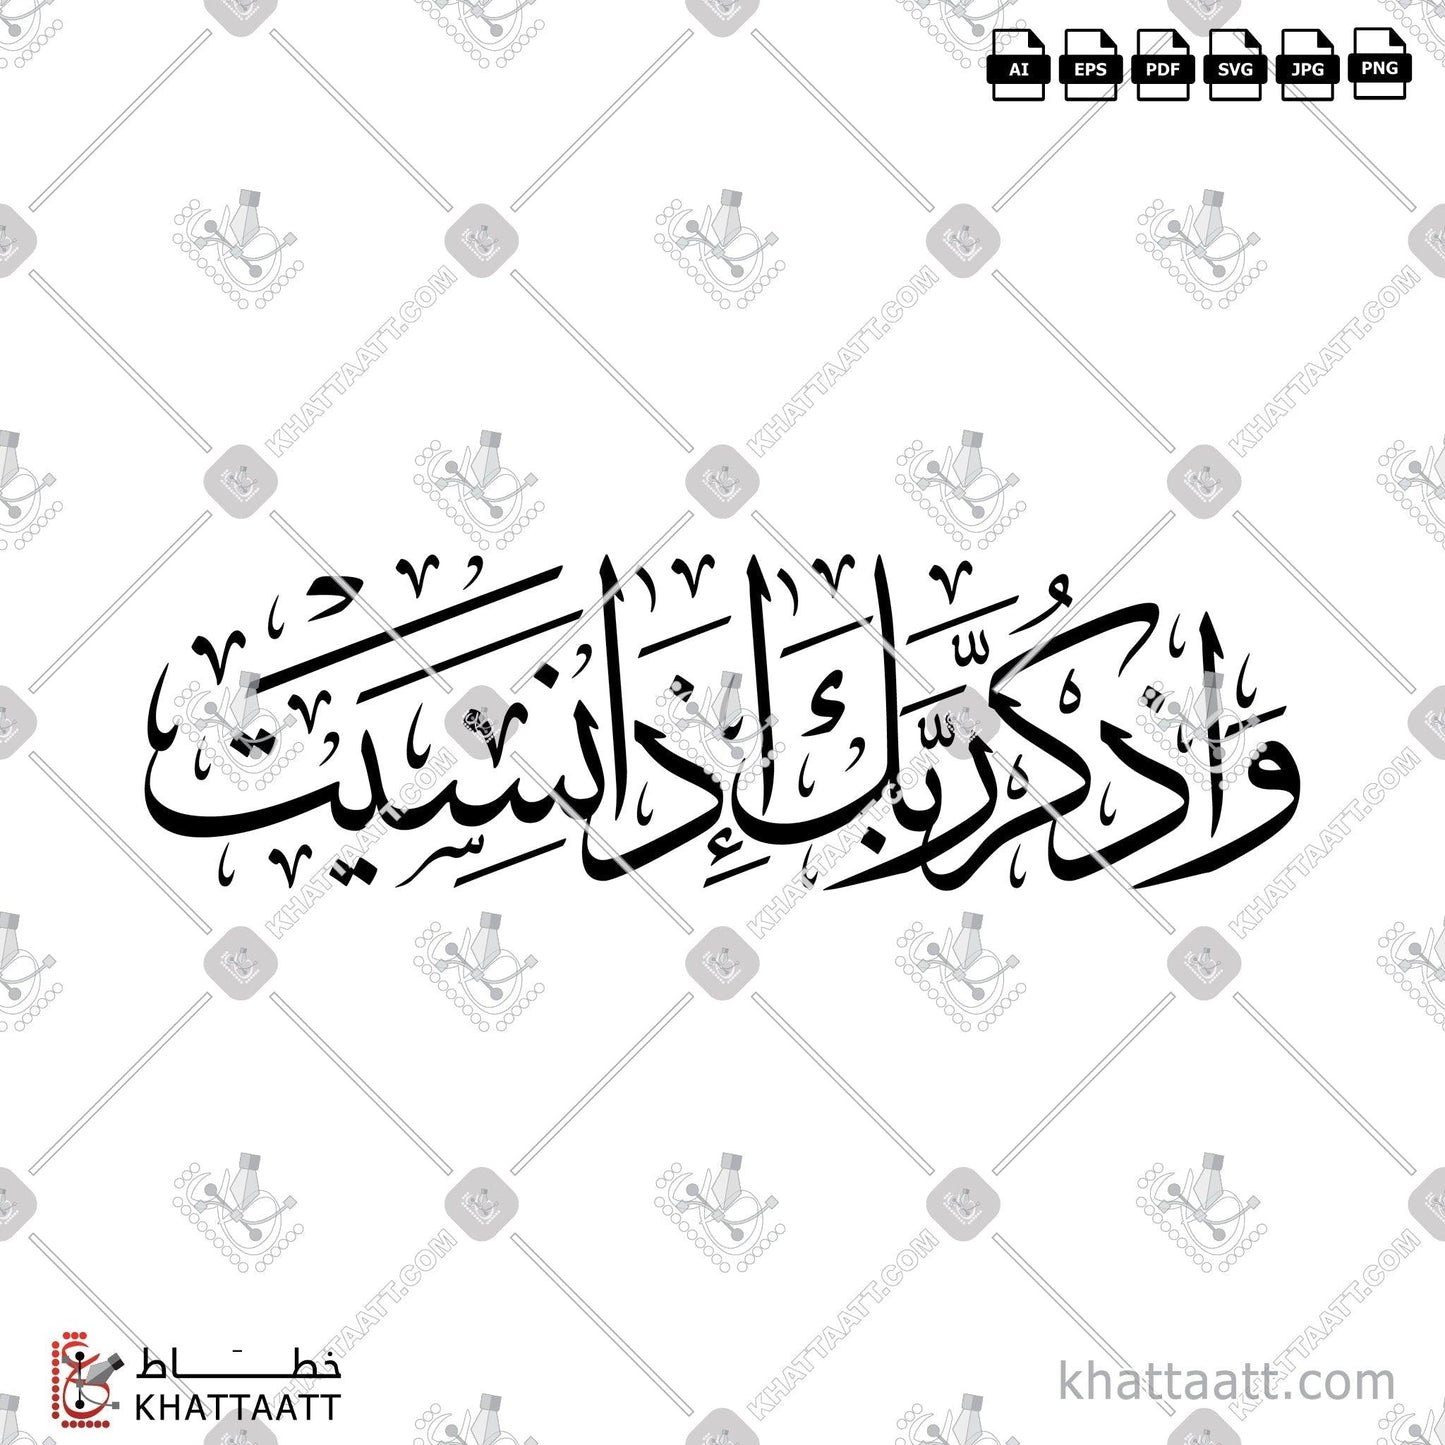 Download Arabic Calligraphy of واذكر ربك إذا نسيت in Thuluth - خط الثلث in vector and .png